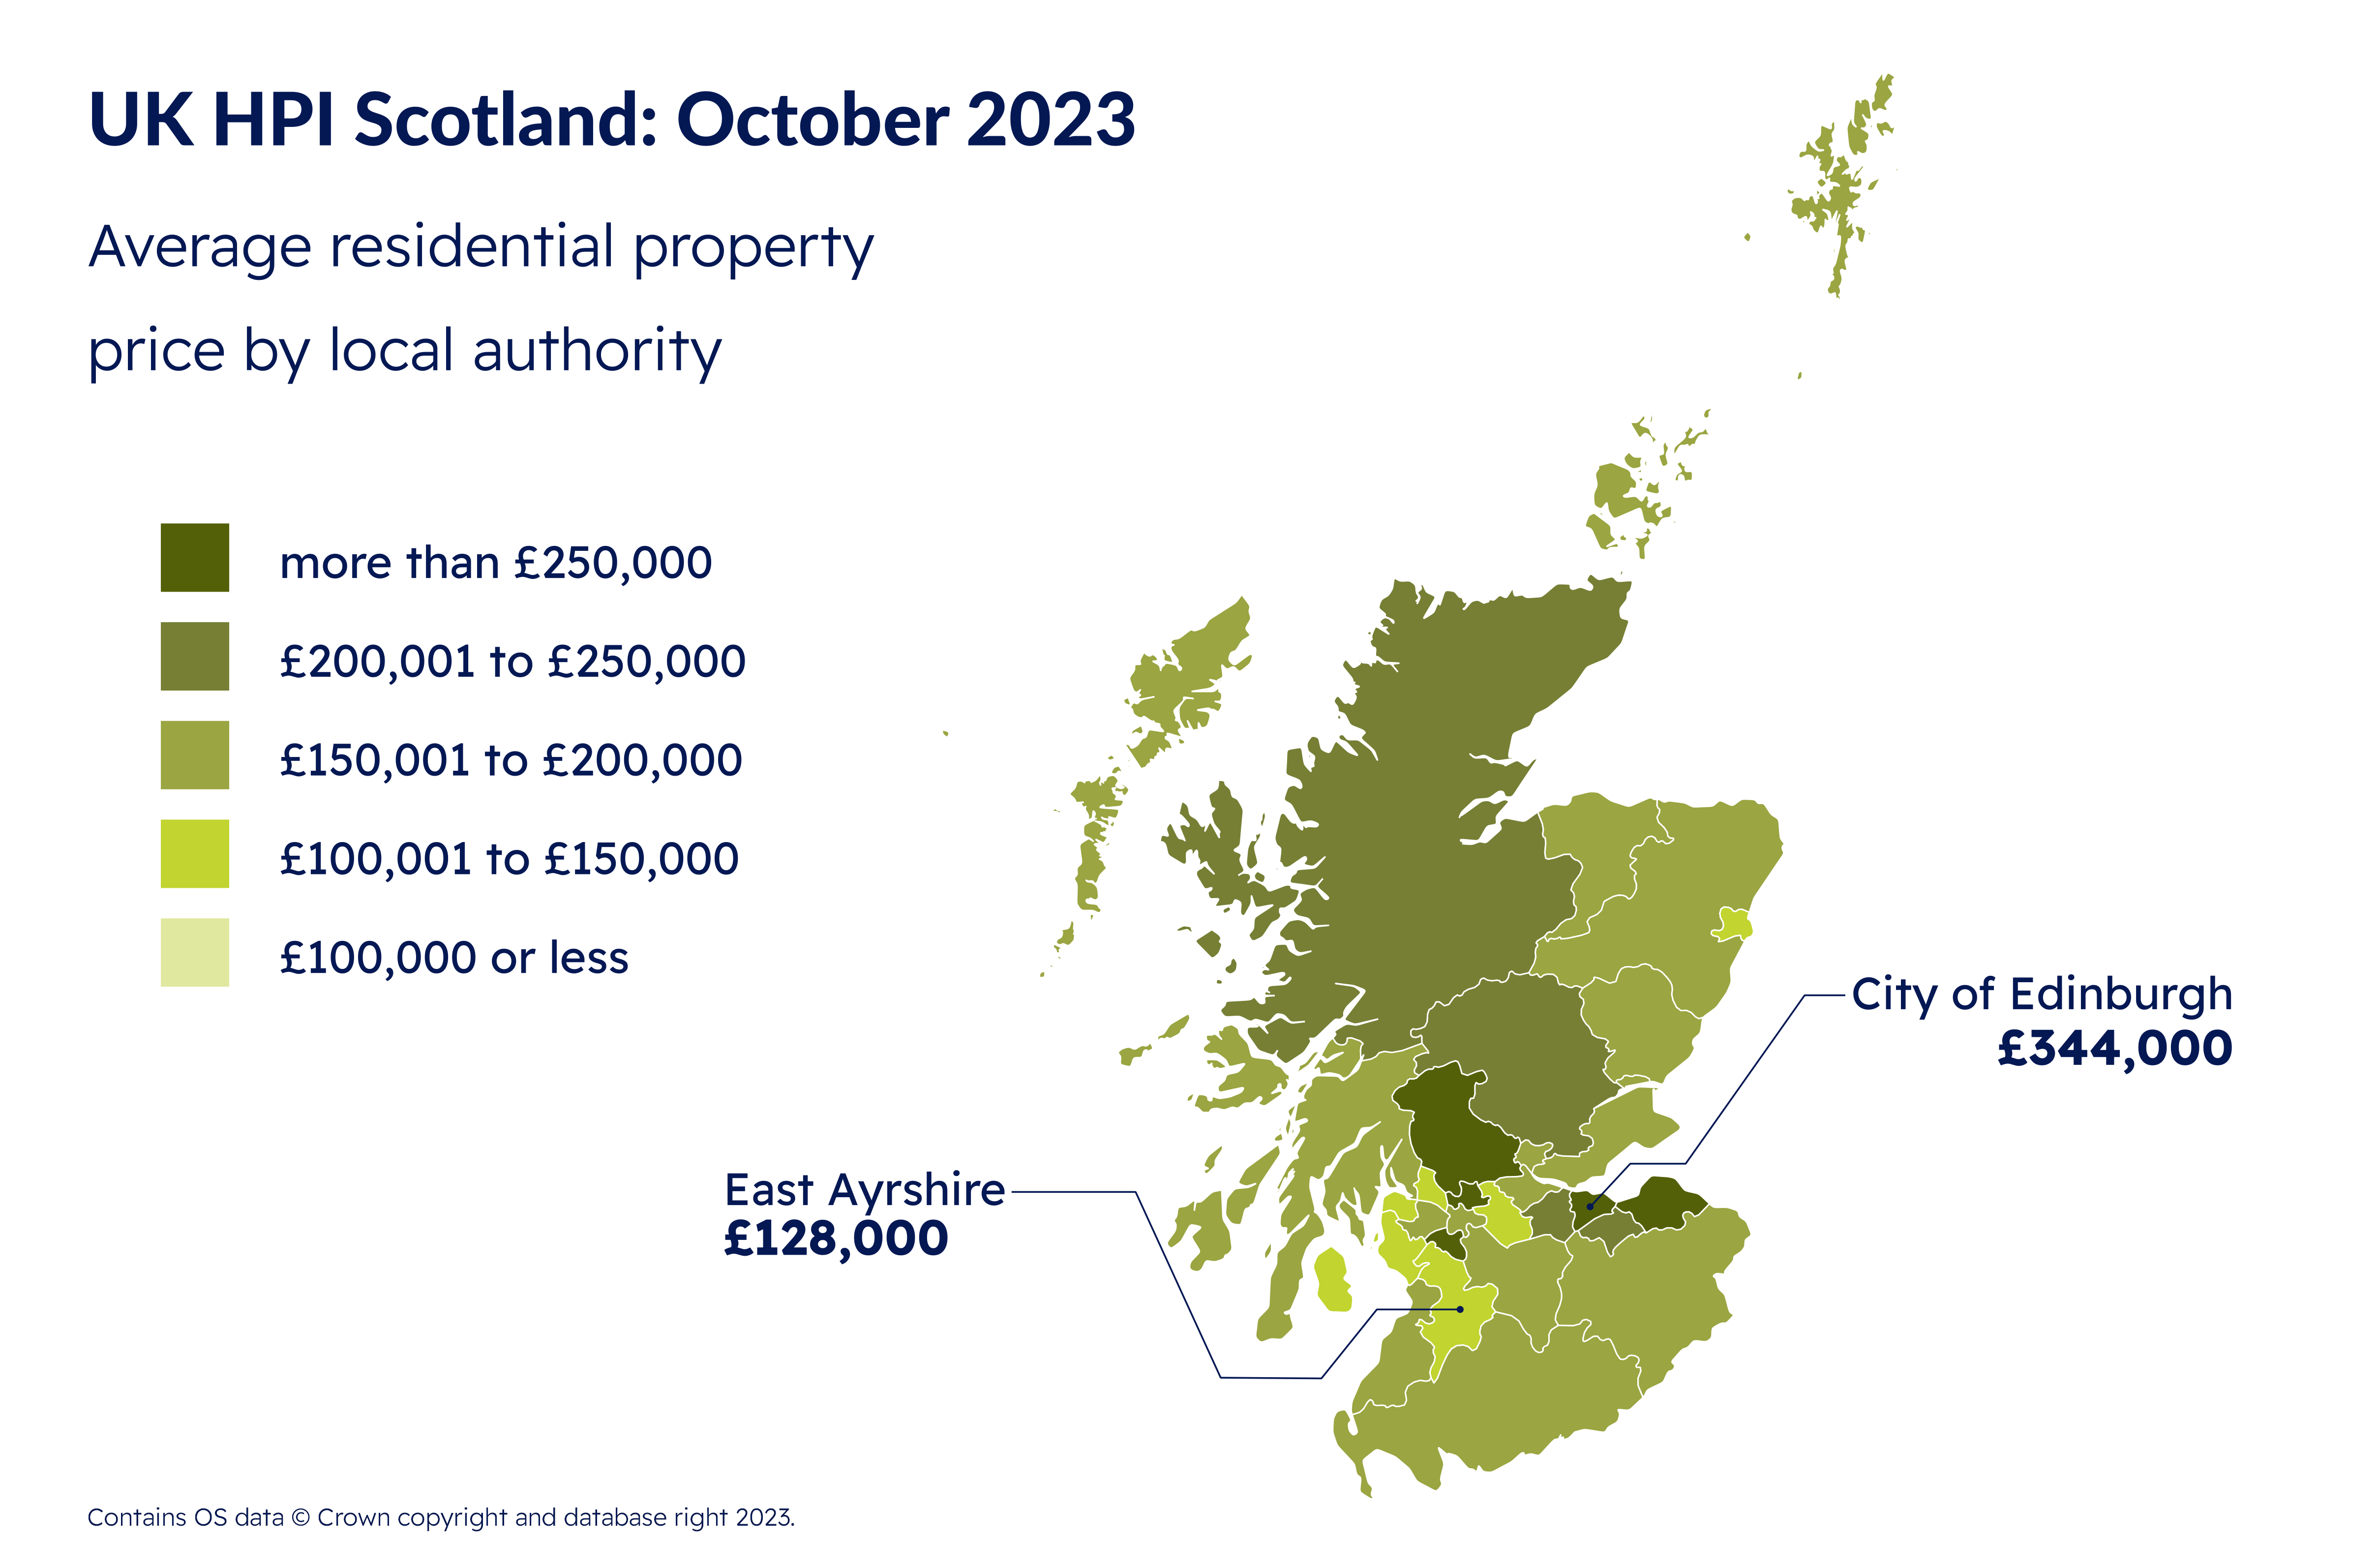 Registers of Scotland: Modest annual growth in Scottish property prices